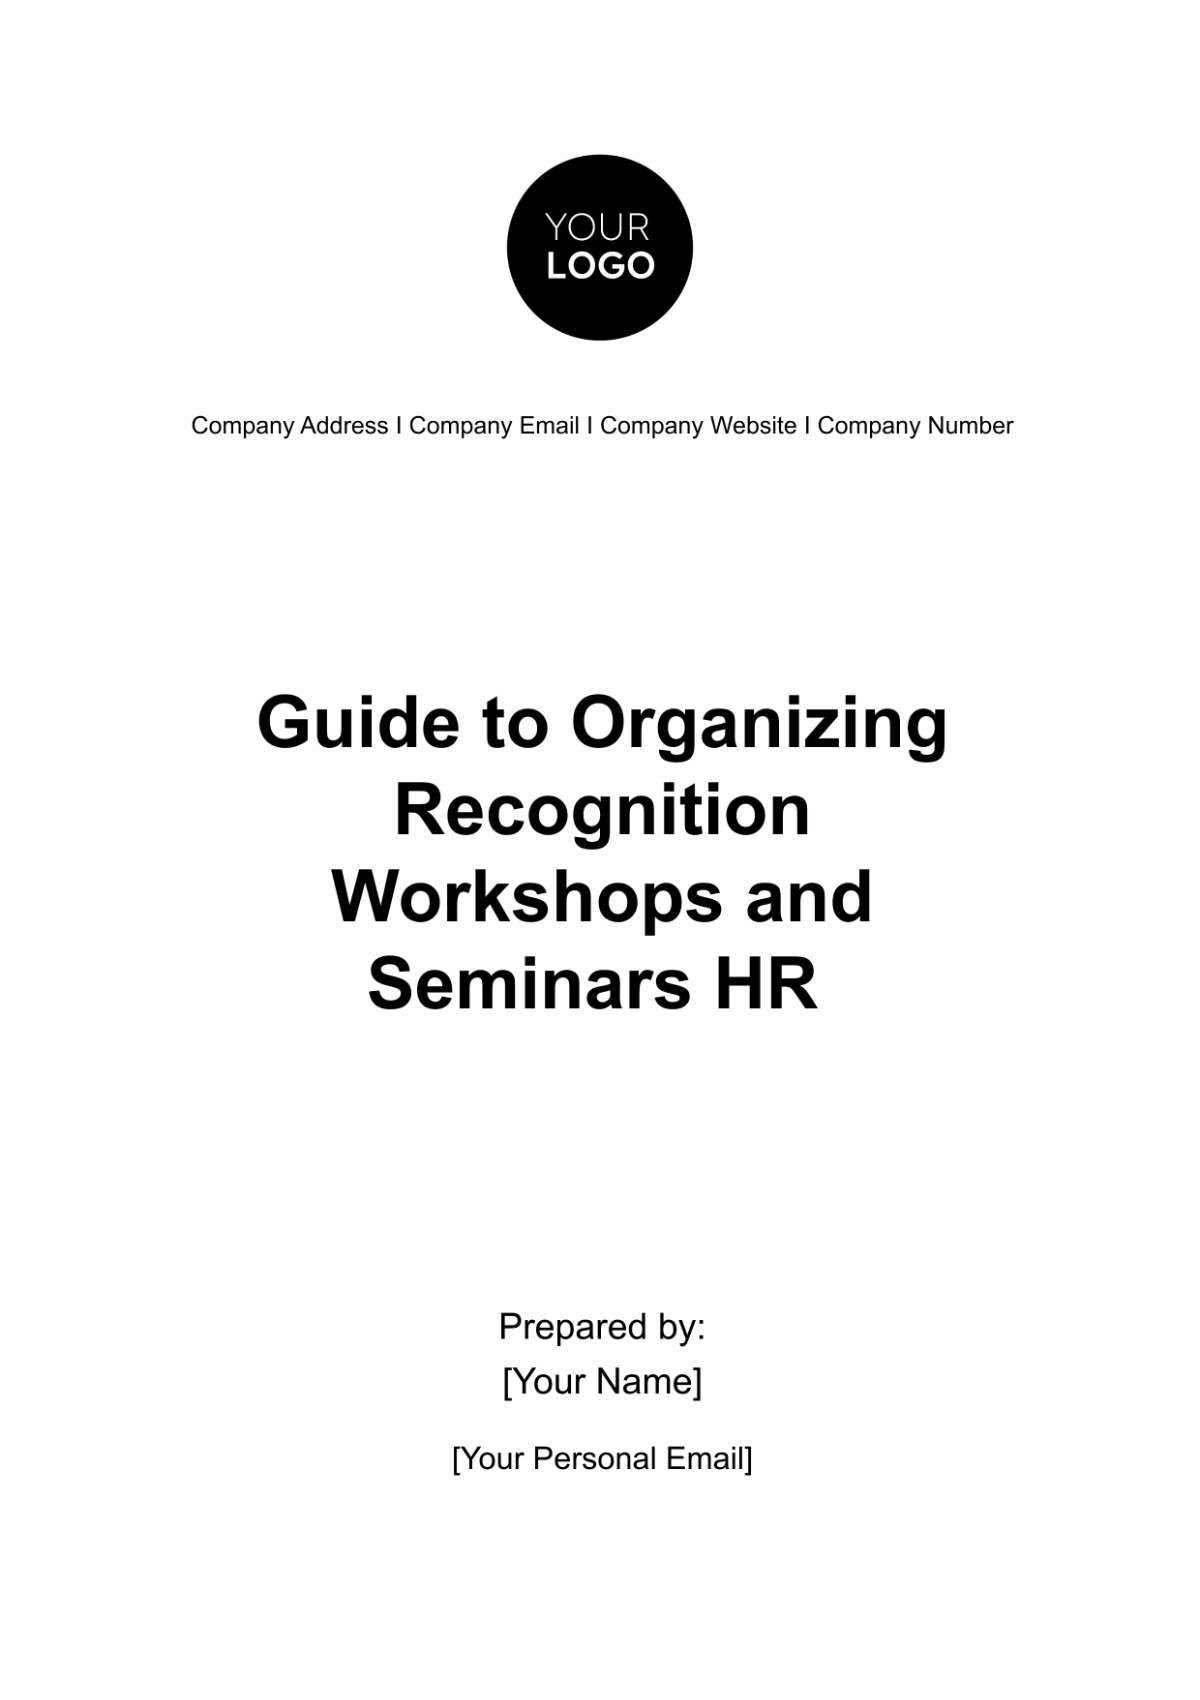 Free Guide to Organizing Recognition Workshops and Seminars HR Template